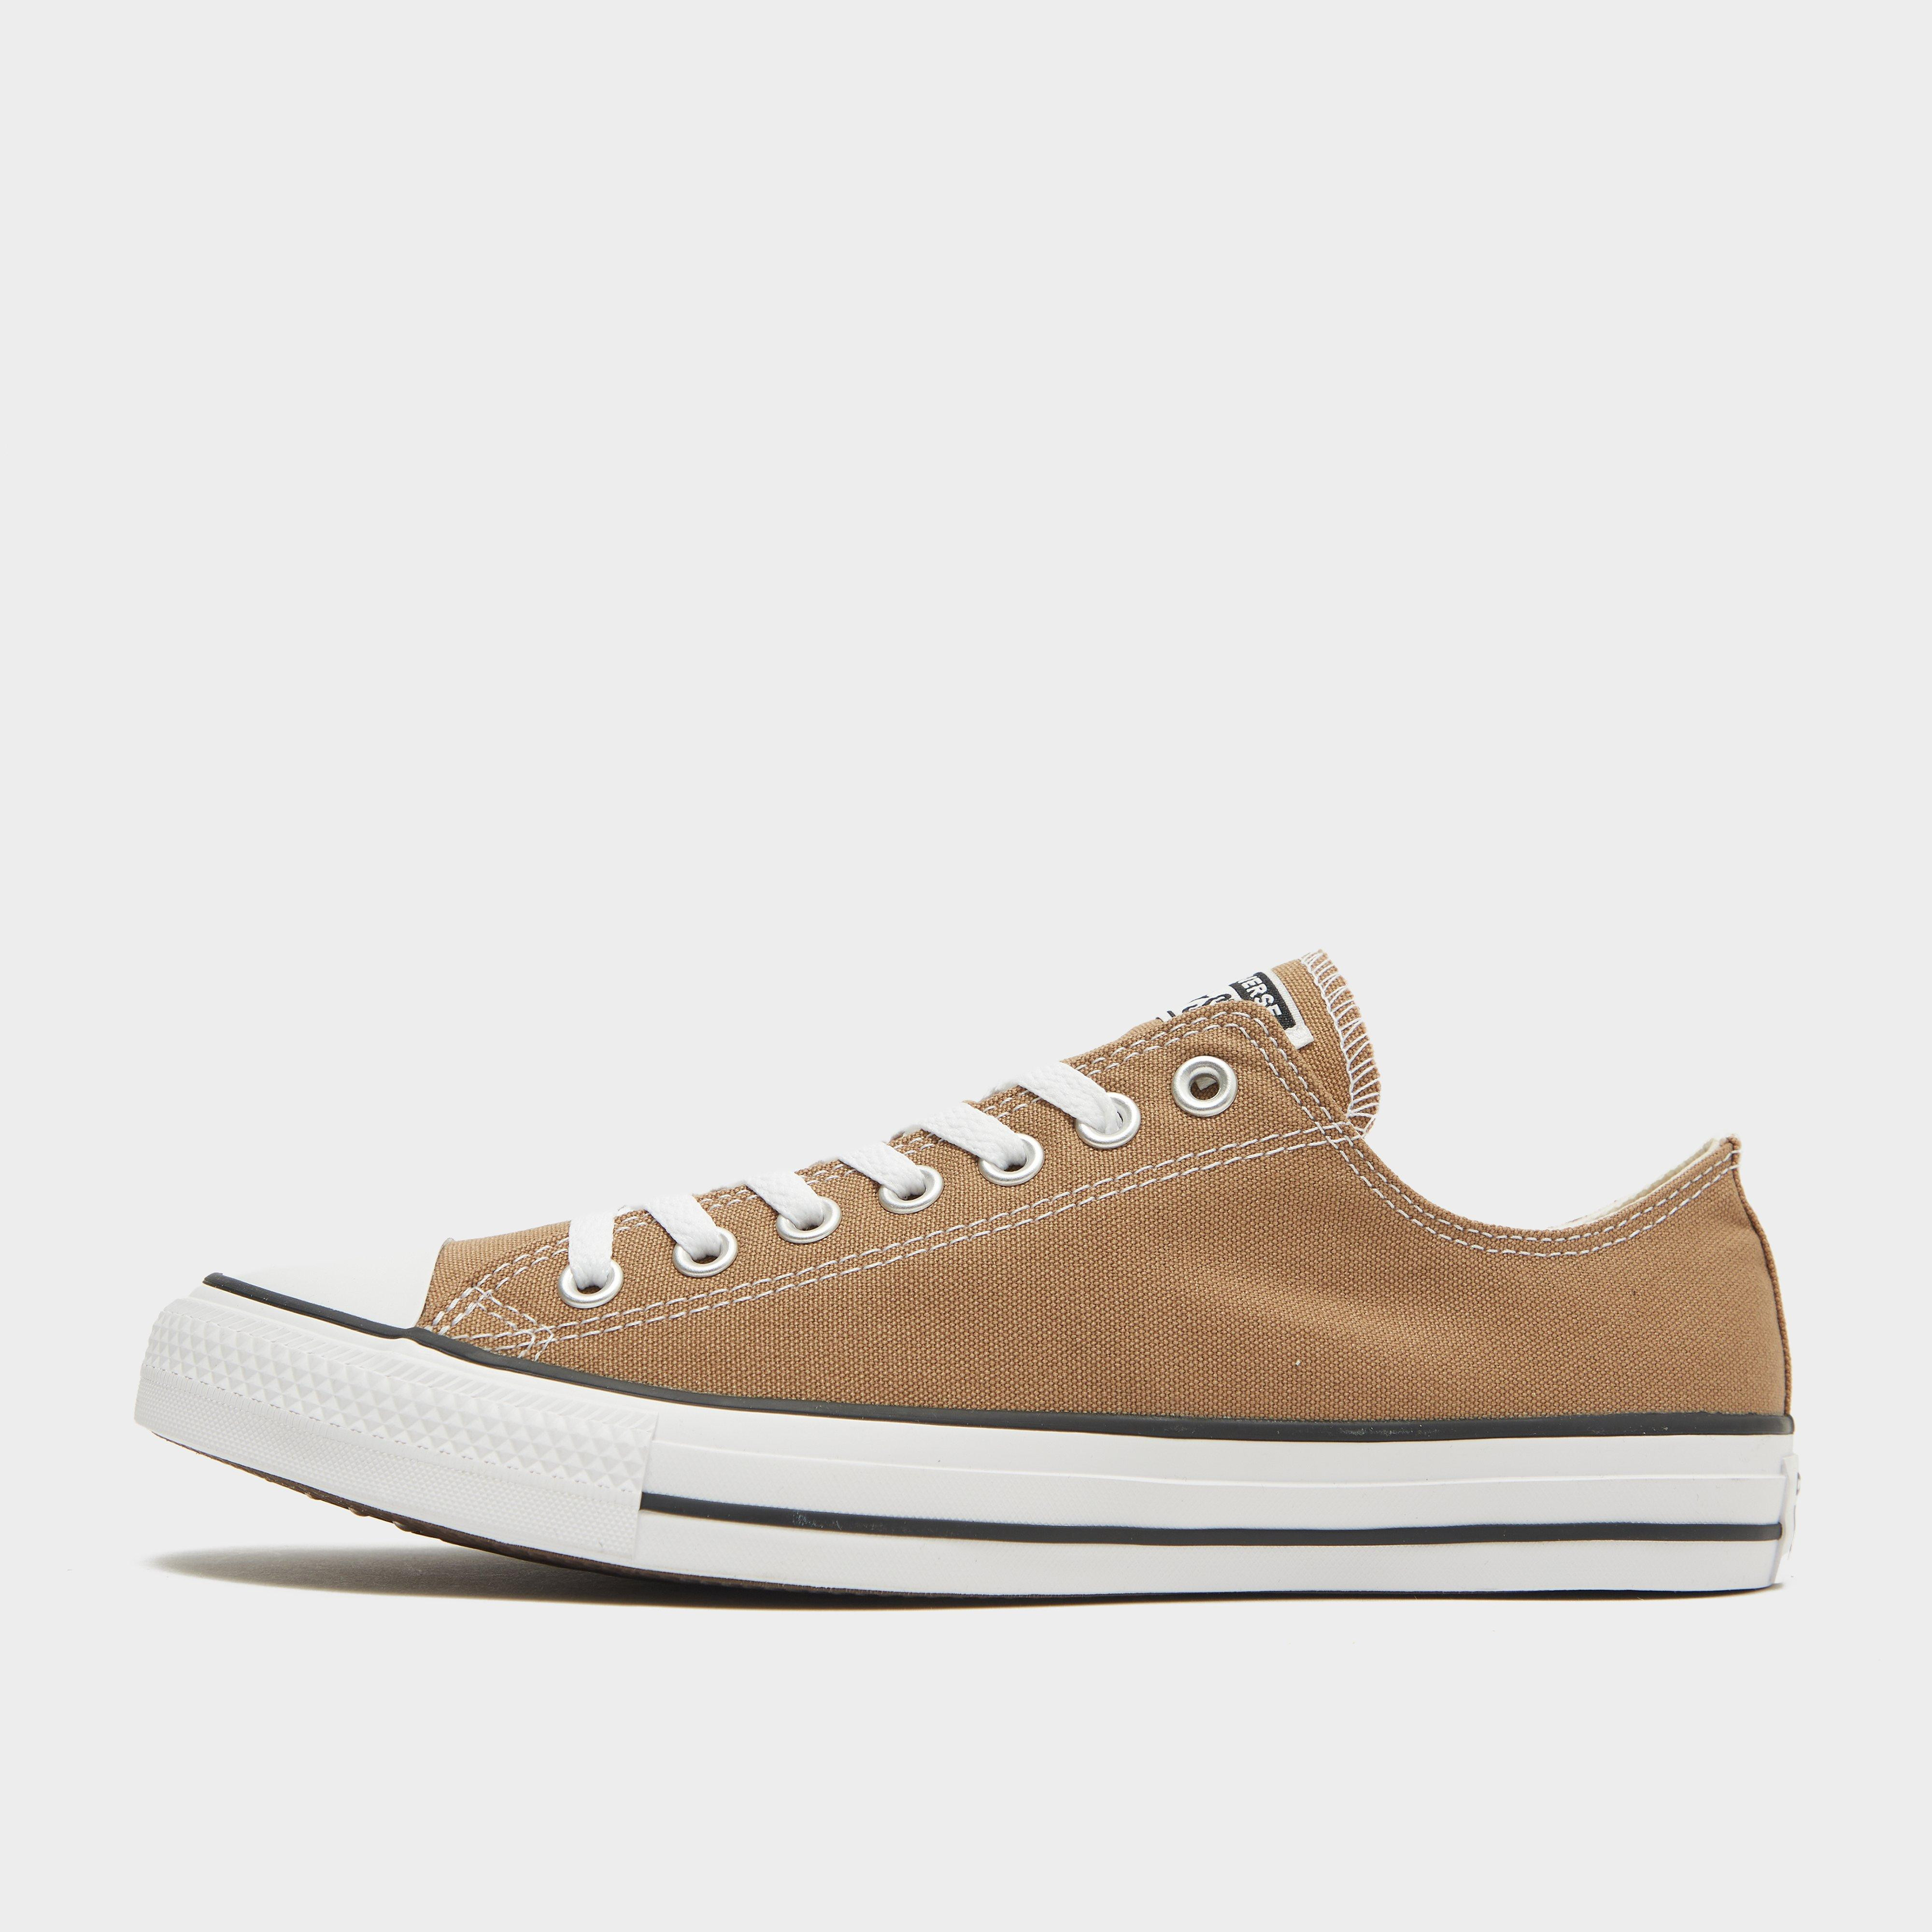 Converse Chuck Taylor All Star Ox Unisex Shoes Brown A00786C